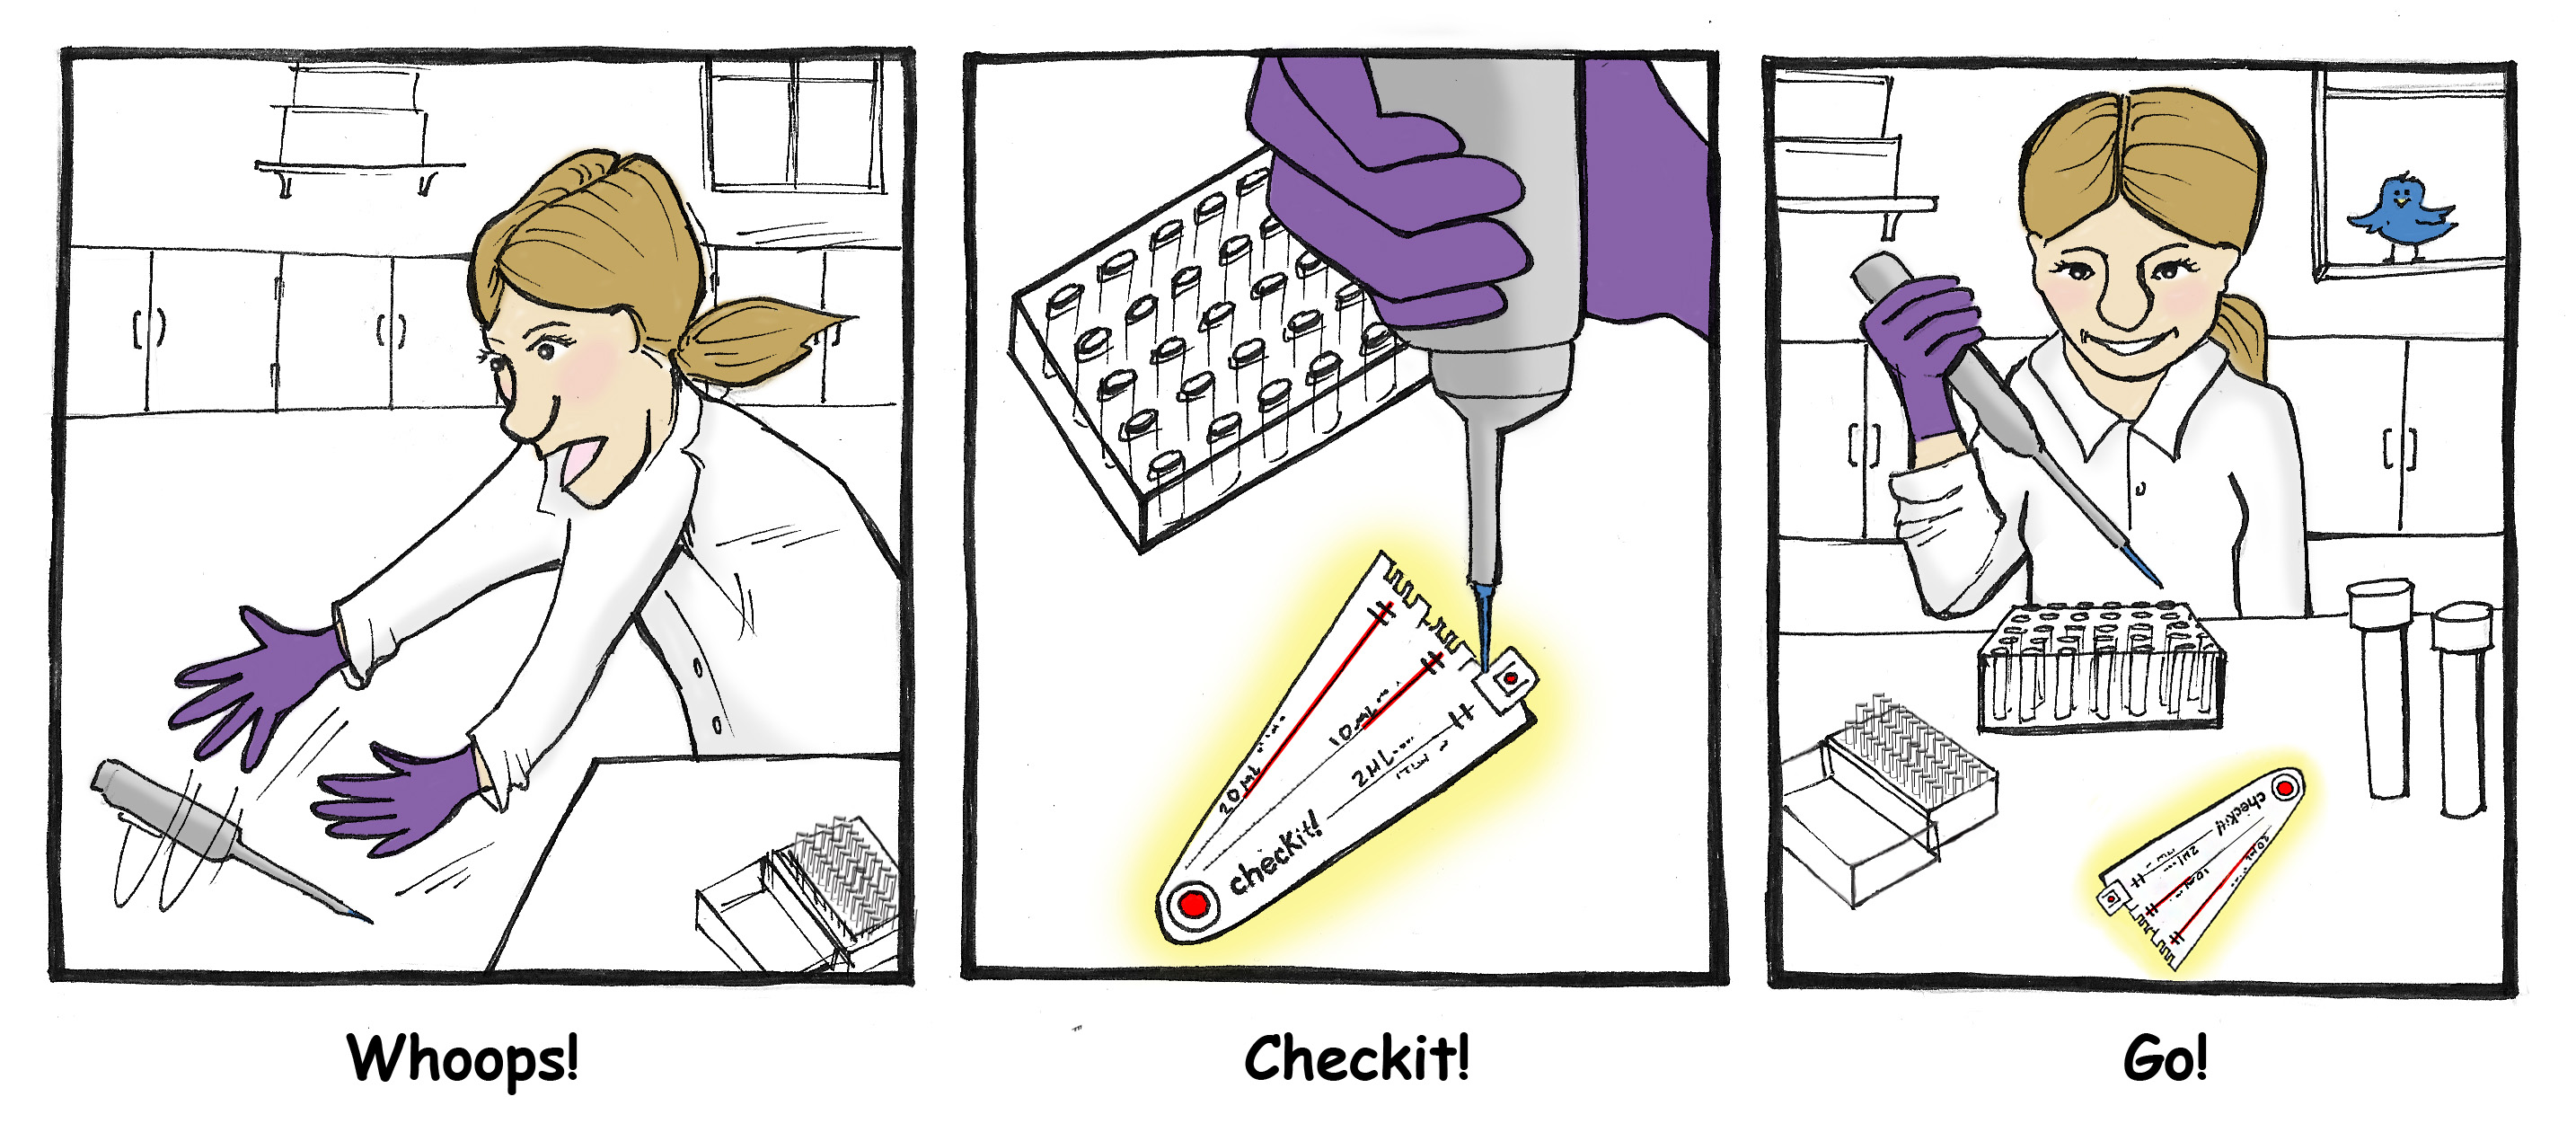 A comic of a woman dropping her pippette in the first panel and the same woman, using the checkit in the second panel, and pipetting happily in the last panel